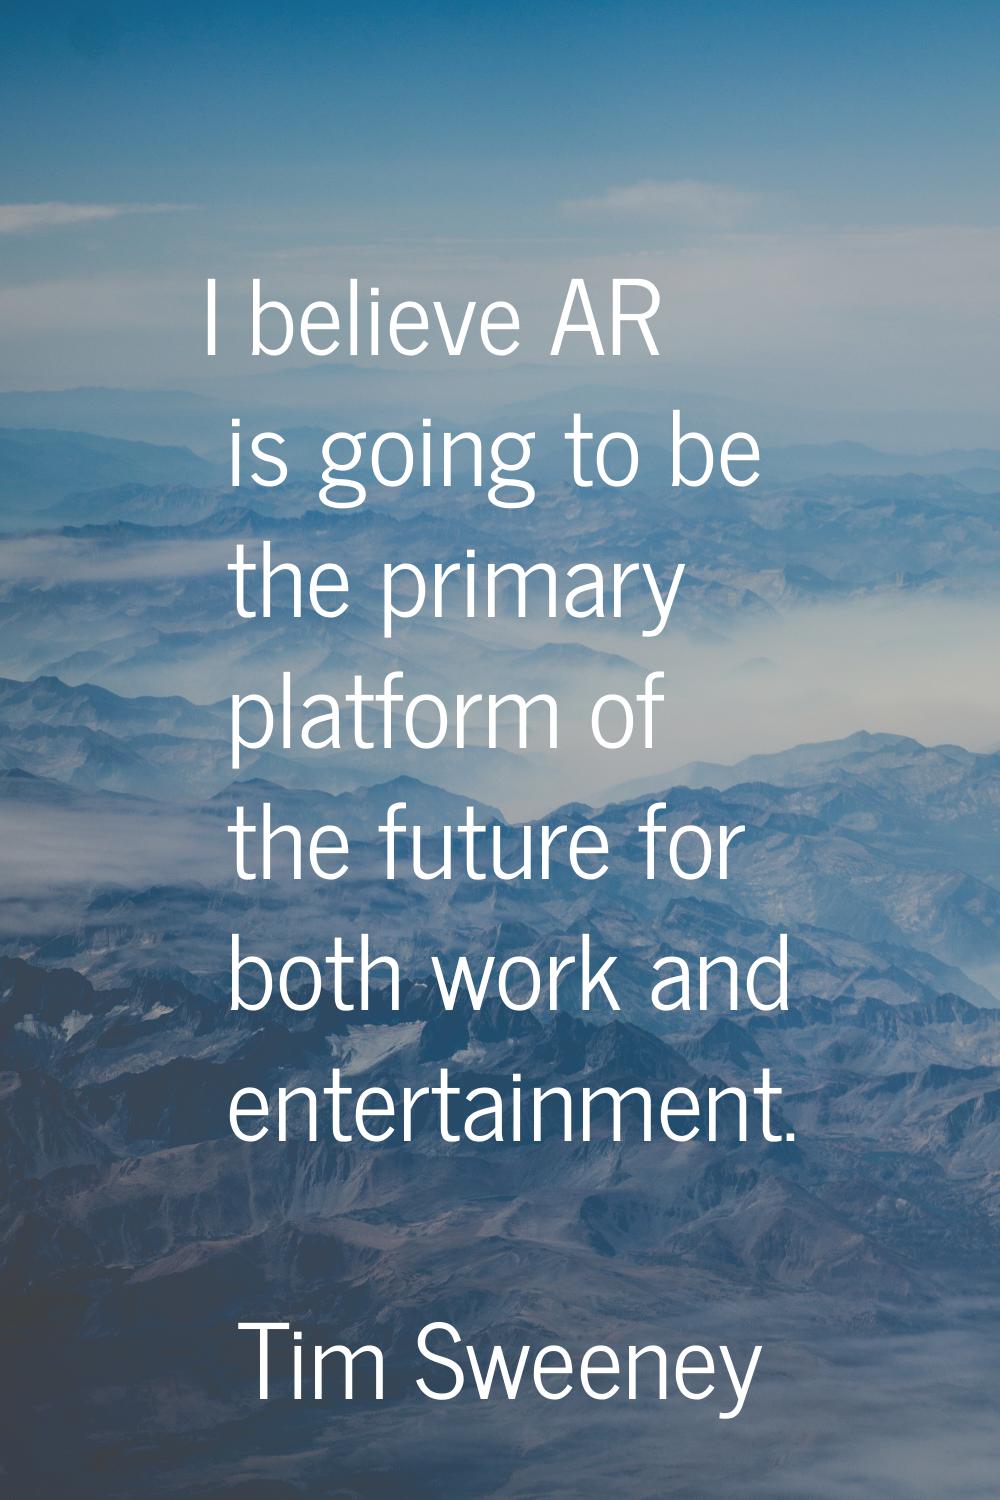 I believe AR is going to be the primary platform of the future for both work and entertainment.